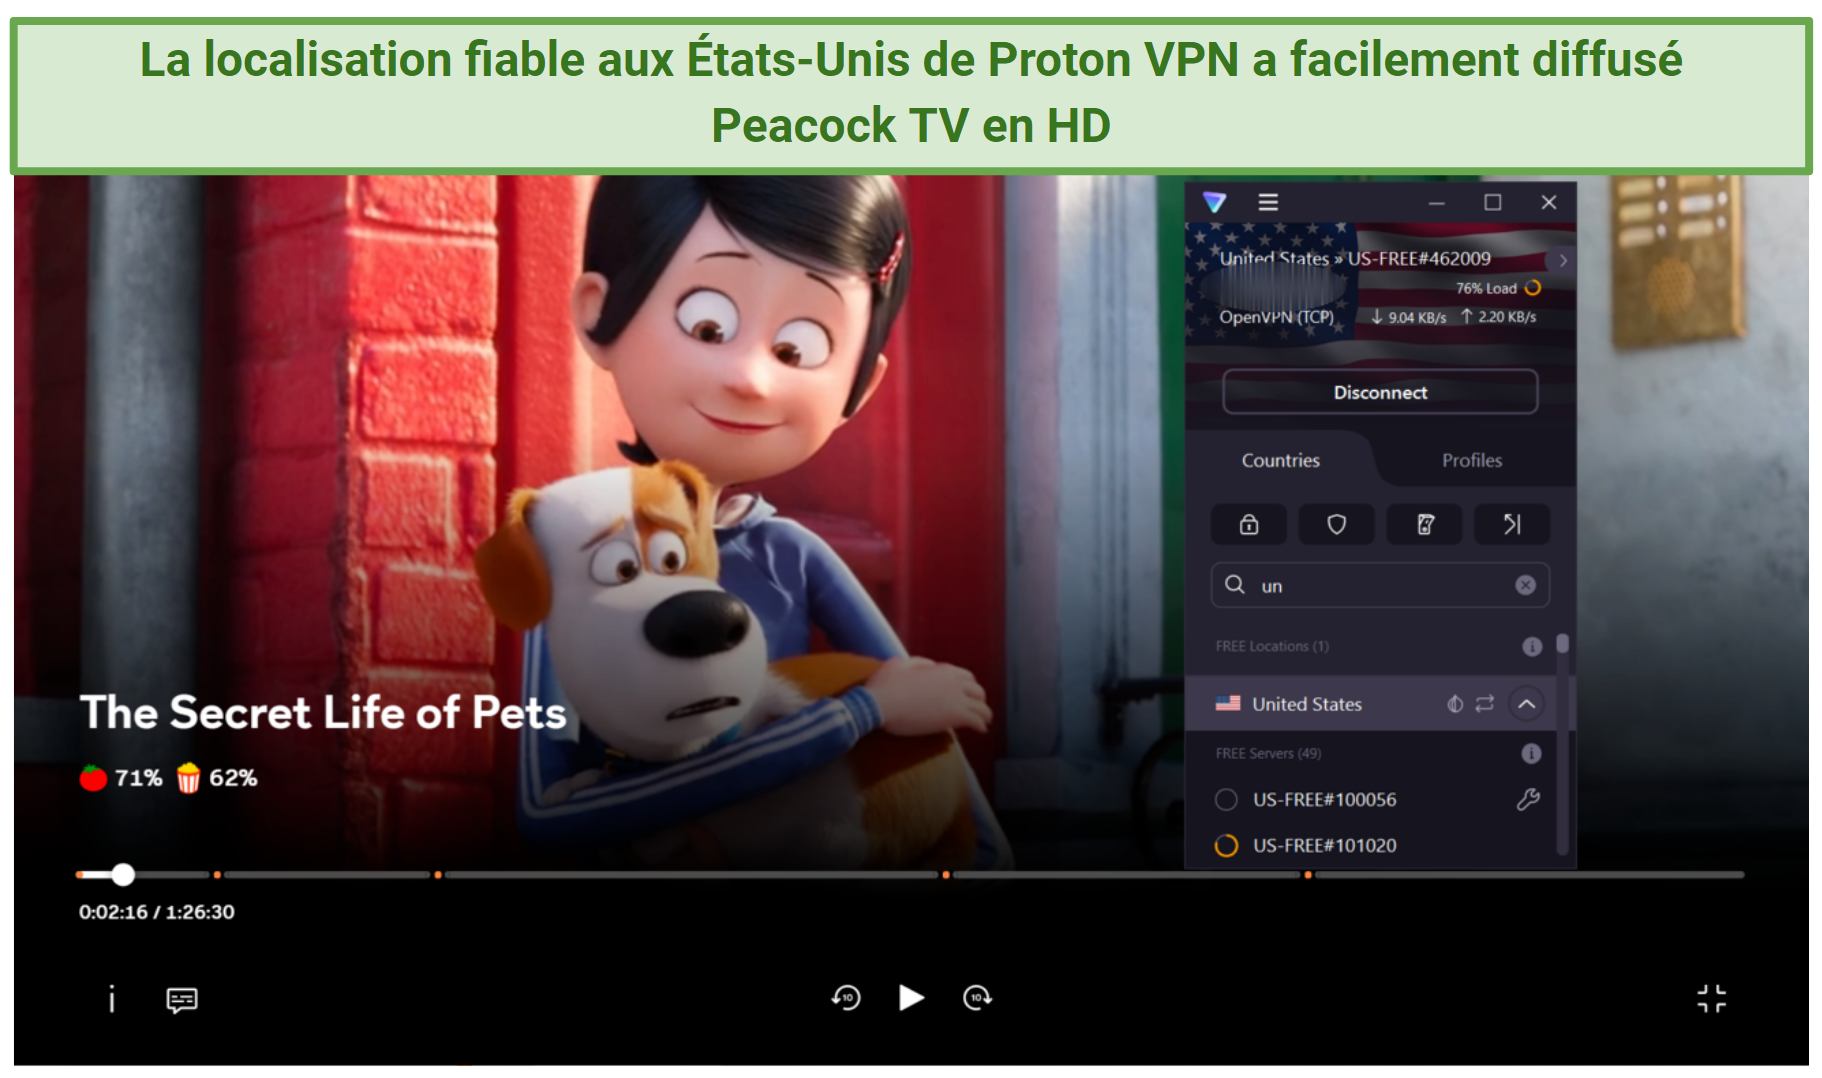 Screenshot of The Secret Life of Pets streaming on Peacock TV with Proton VPN connected to a United States server